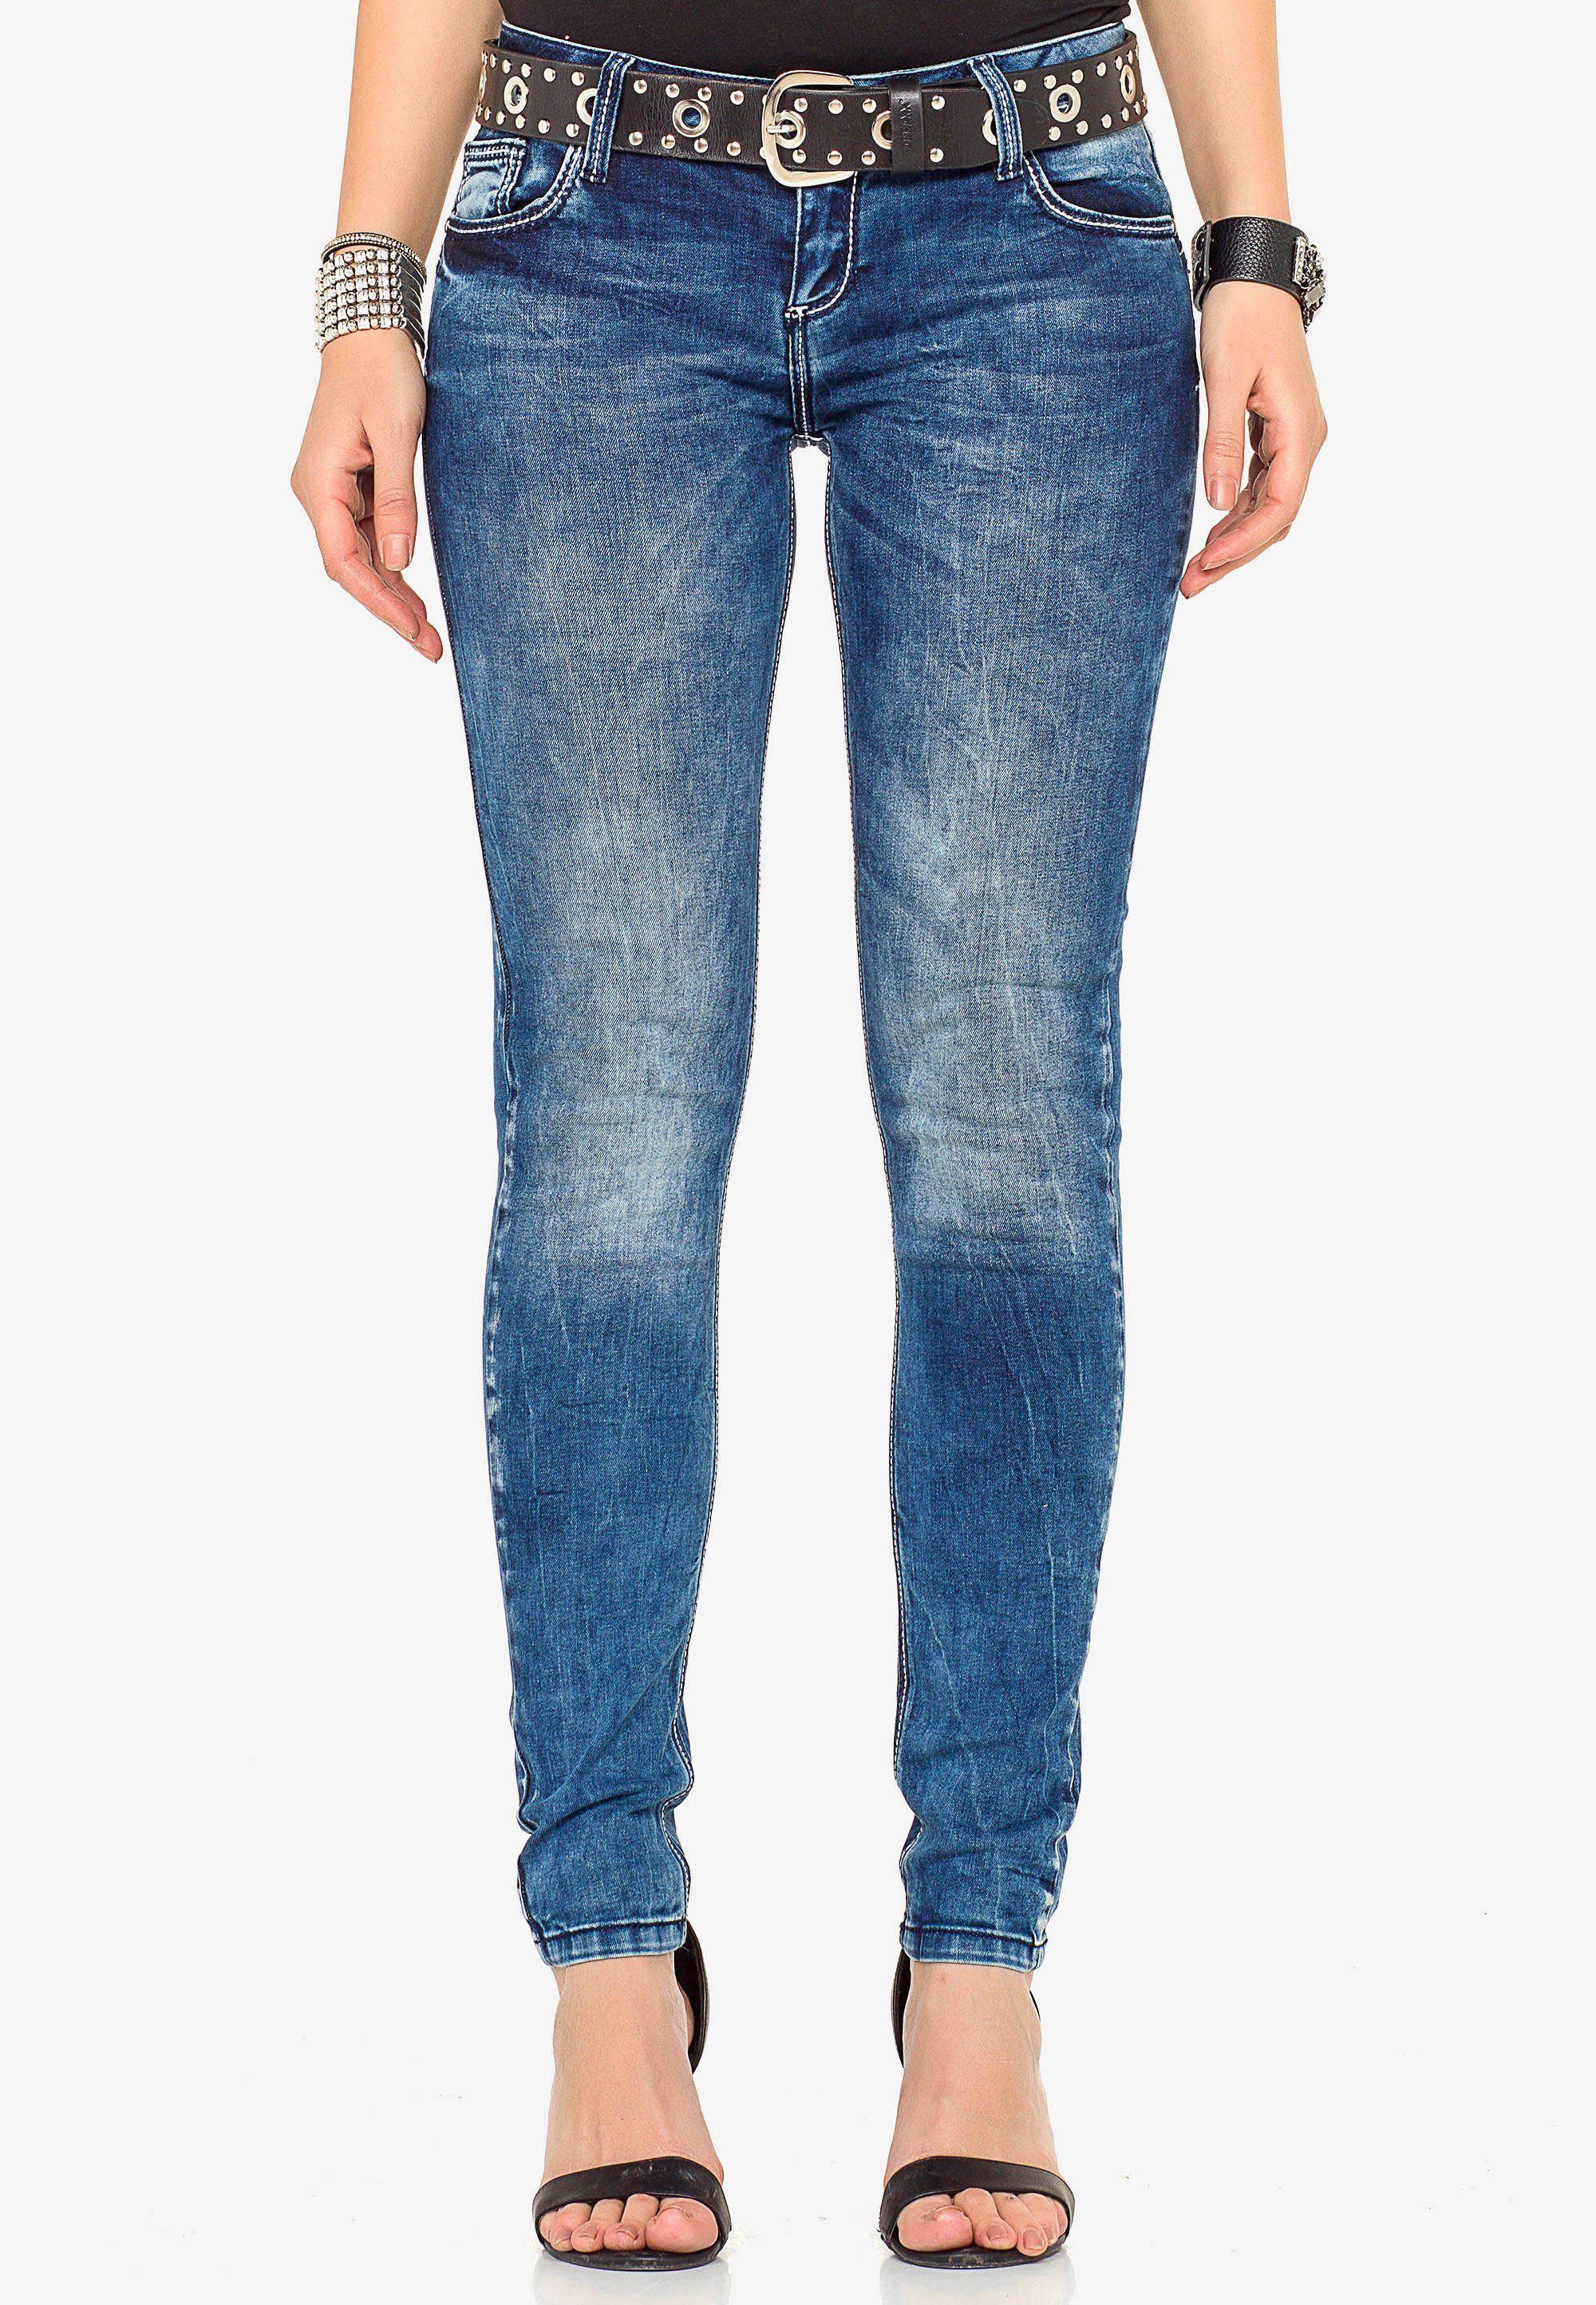 Damen Jeans Cipo & Baxx Slim-fit-Jeans mit cooler Waschung n Straight Fit